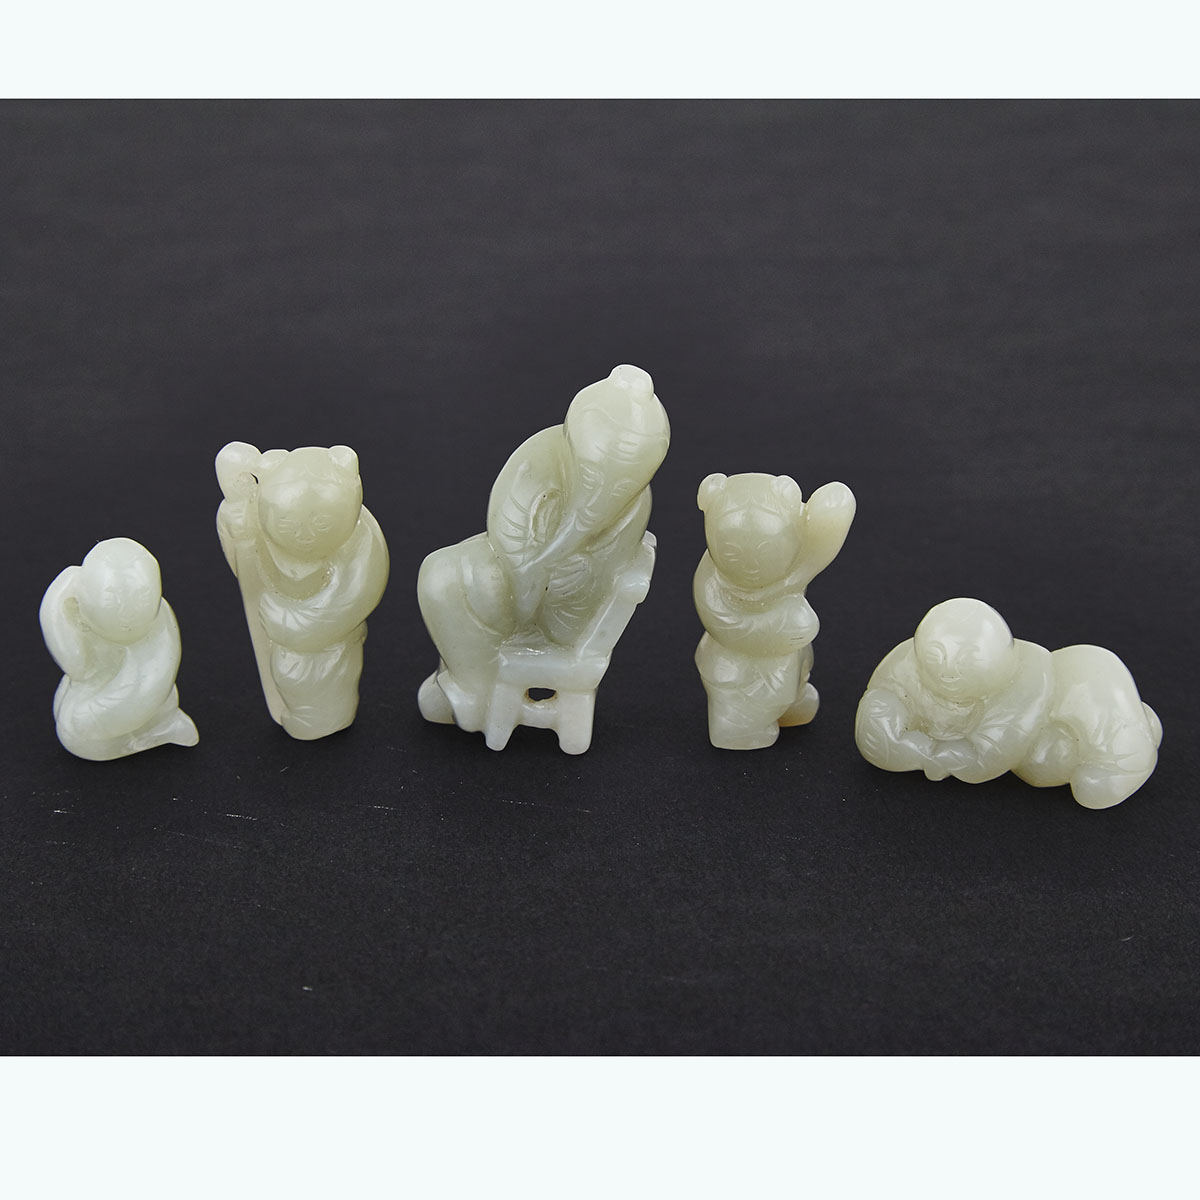 Group of Five Pale Celadon Jade Figural Pebbles, 19th/20th Century